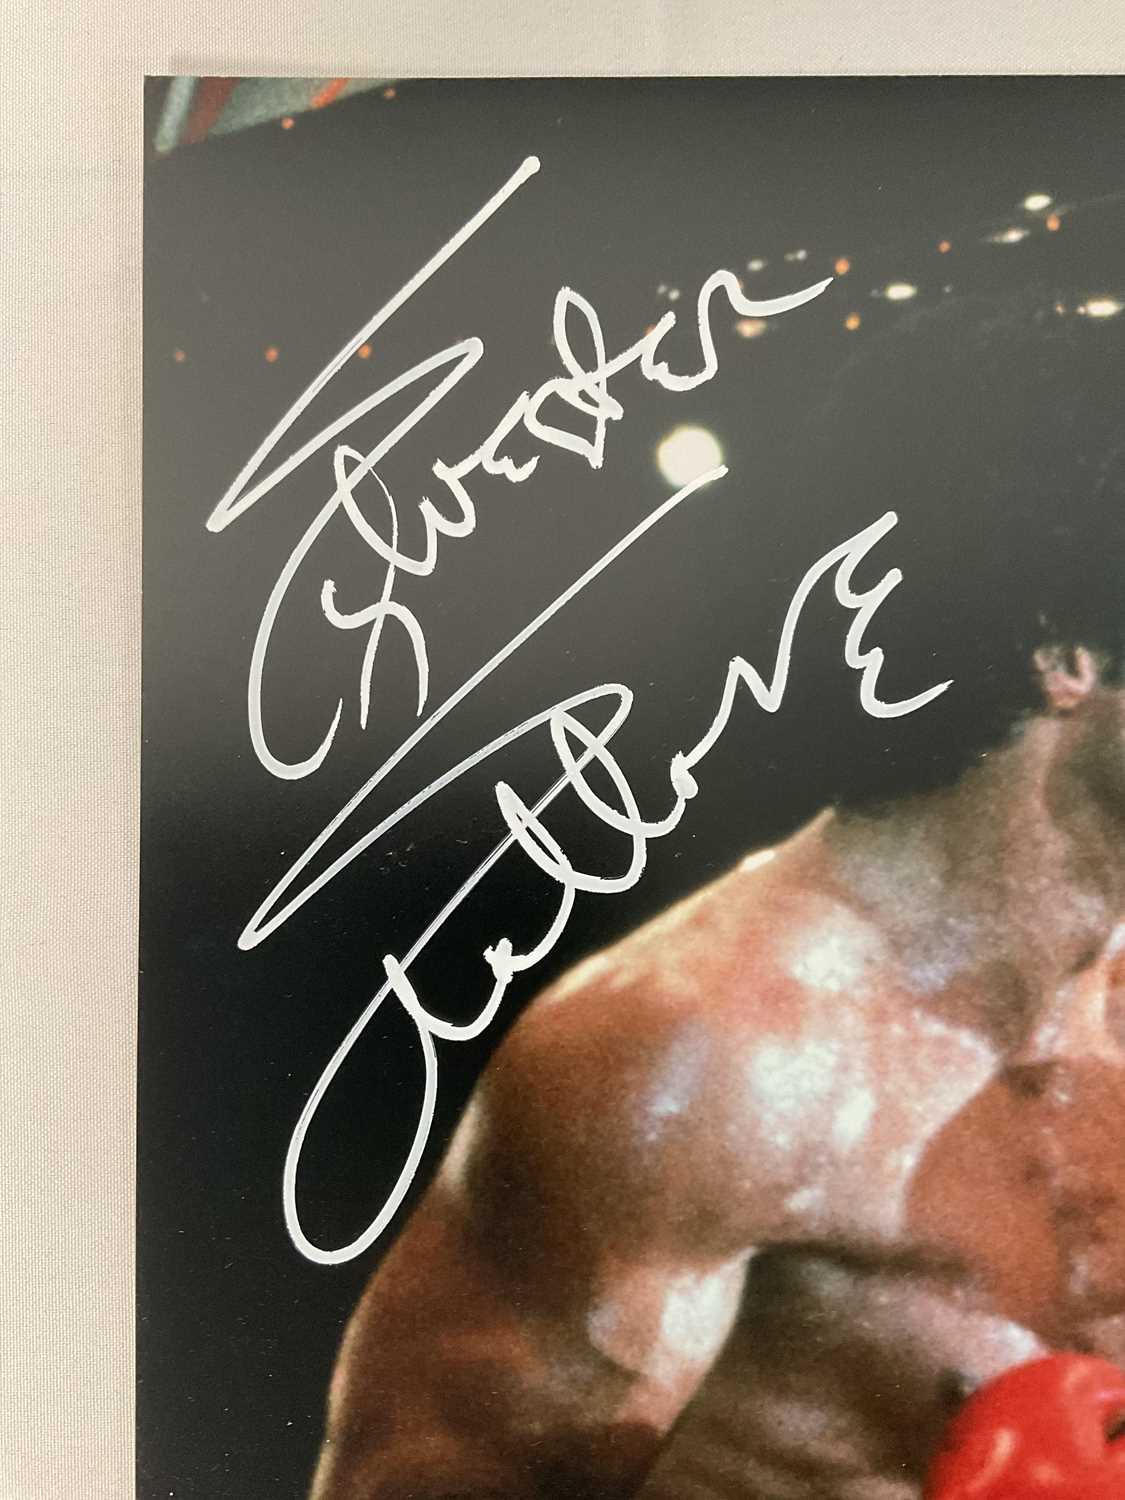 A 16" x 20" photographic still from ROCKY IV signed by SYLVESTER STALLONE and DOLPH LUNDGREN, with - Image 2 of 4